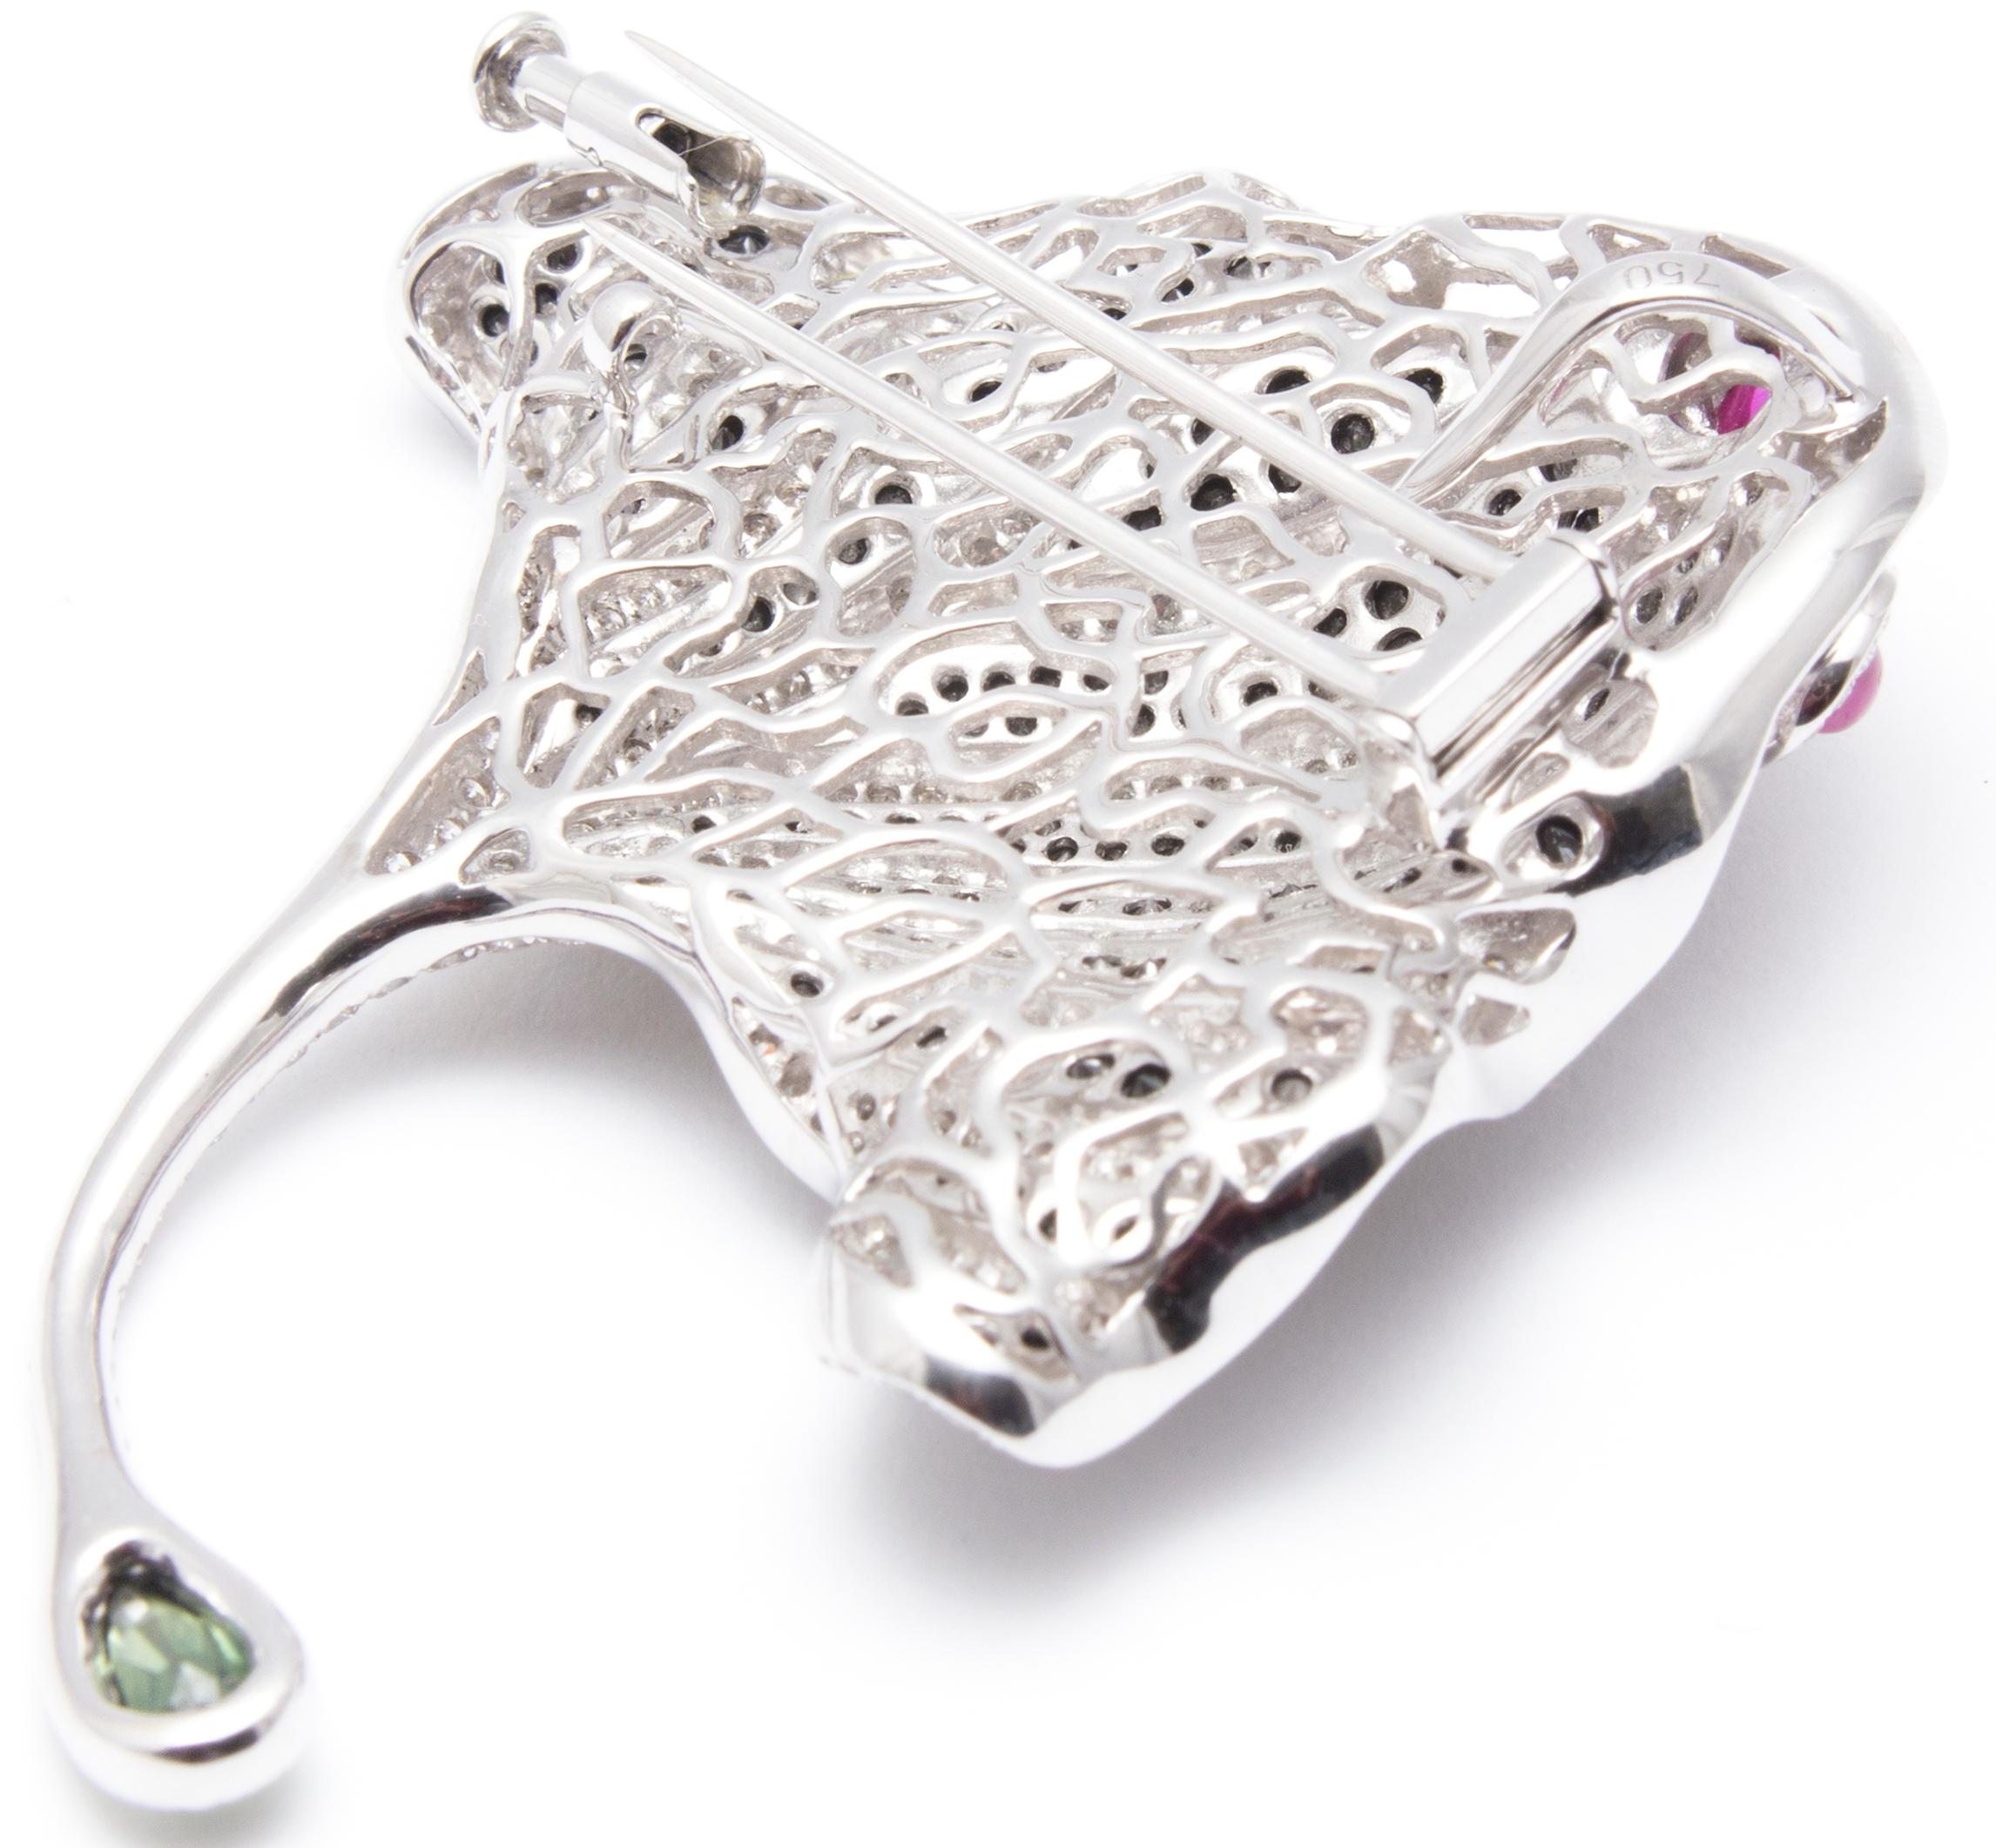 Stingray Brooch or Pendant in White Gold, Diamond, Ruby, Tourmaline, Black Gem In Excellent Condition For Sale In Dorset, GB